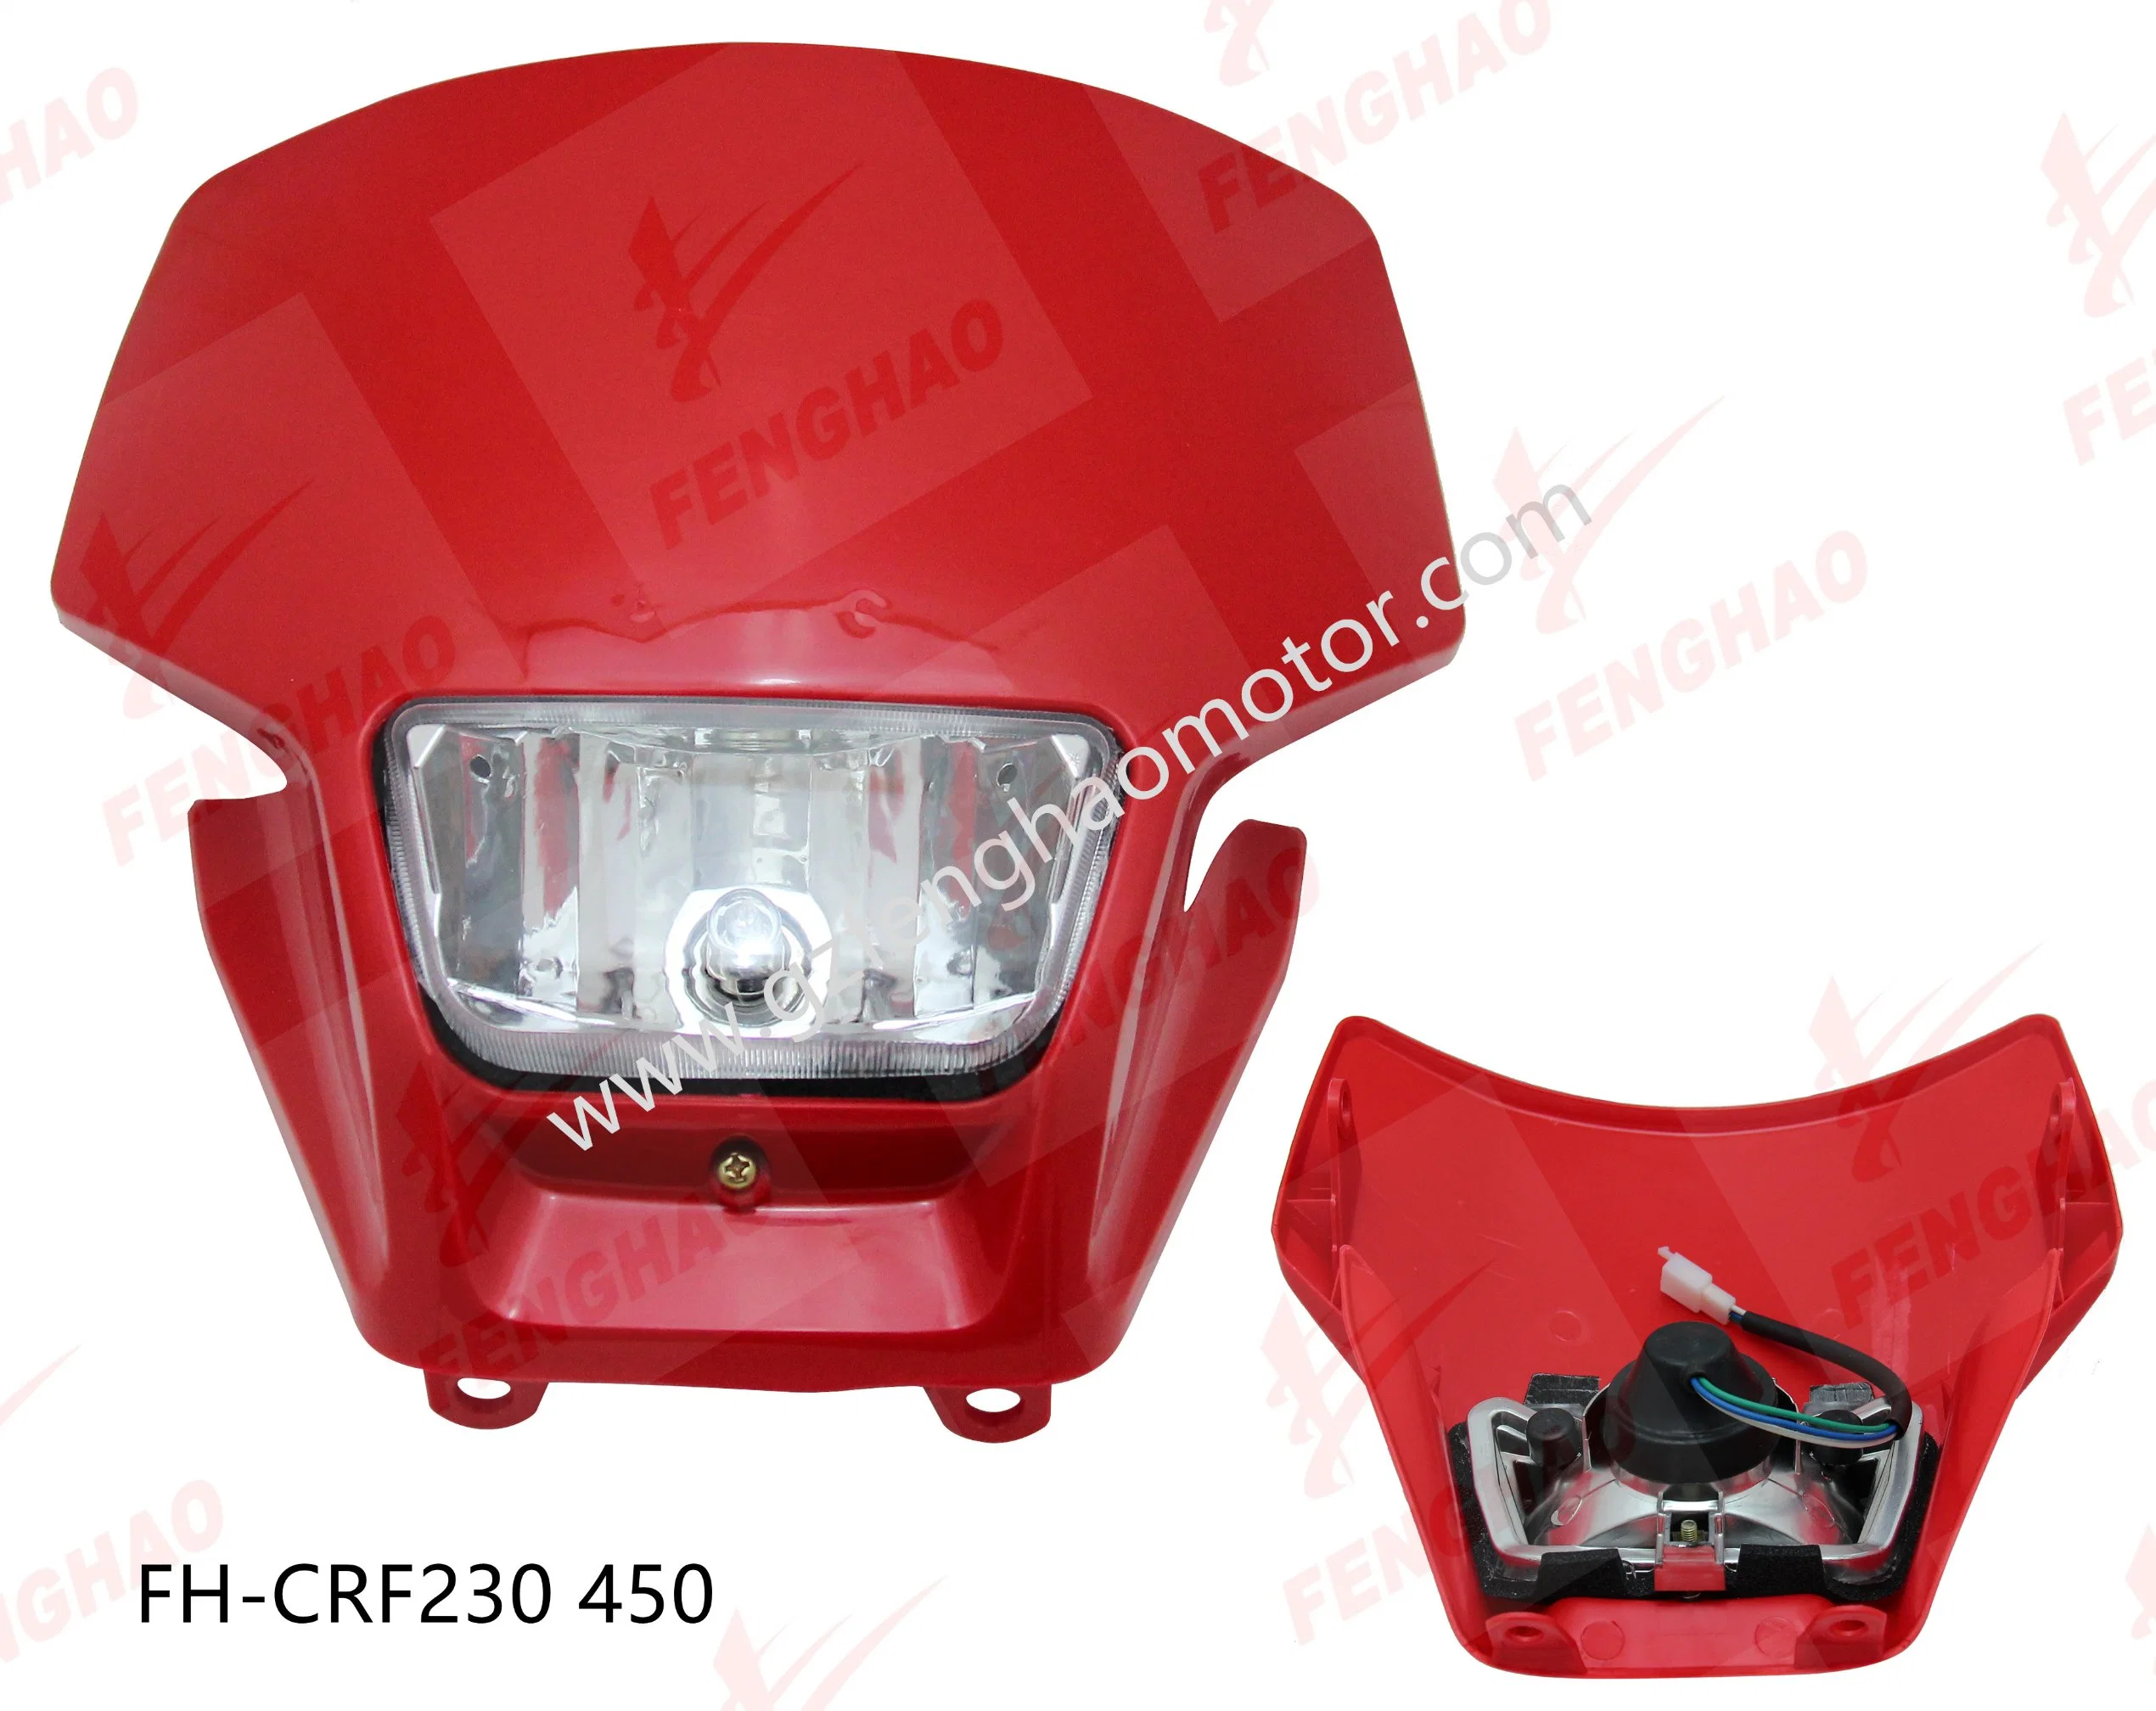 Popular Best Motorcycle Parts Headlight for Honda Gy650/Gy6150/Crf230-450